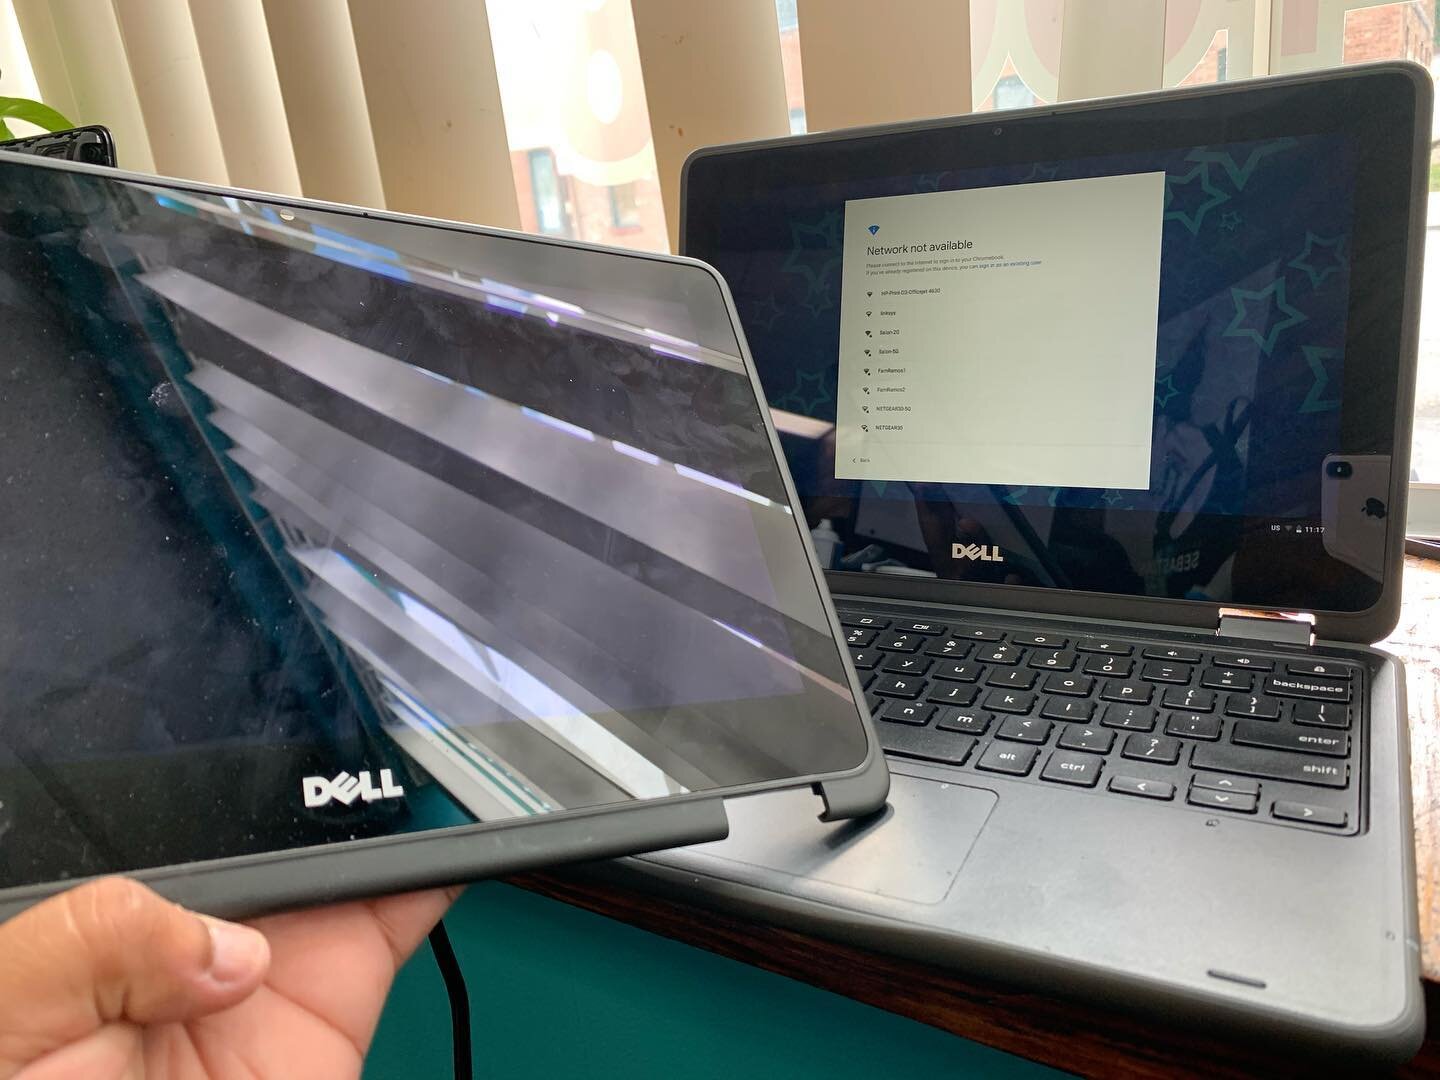 Dell chromebook screen repair for Katia. 📲Call, Text, or slide in our DMs to schedule an appointment. You have our permission. ⭐️⭐️⭐️⭐️⭐️⠀⠀⠀⠀⠀⠀⠀⠀⠀⠀⠀⠀⠀⠀⠀⠀⠀⠀ ⠀⠀⠀⠀⠀⠀⠀⠀⠀⠀⠀⠀⠀⠀⠀⠀⠀⠀
💻 EzekielTech
📲: (845) 857-5760 ⠀⠀⠀⠀⠀⠀⠀⠀⠀⠀⠀⠀⠀⠀⠀⠀⠀⠀⠀⠀ 🌎:www.Ezekiel.tech